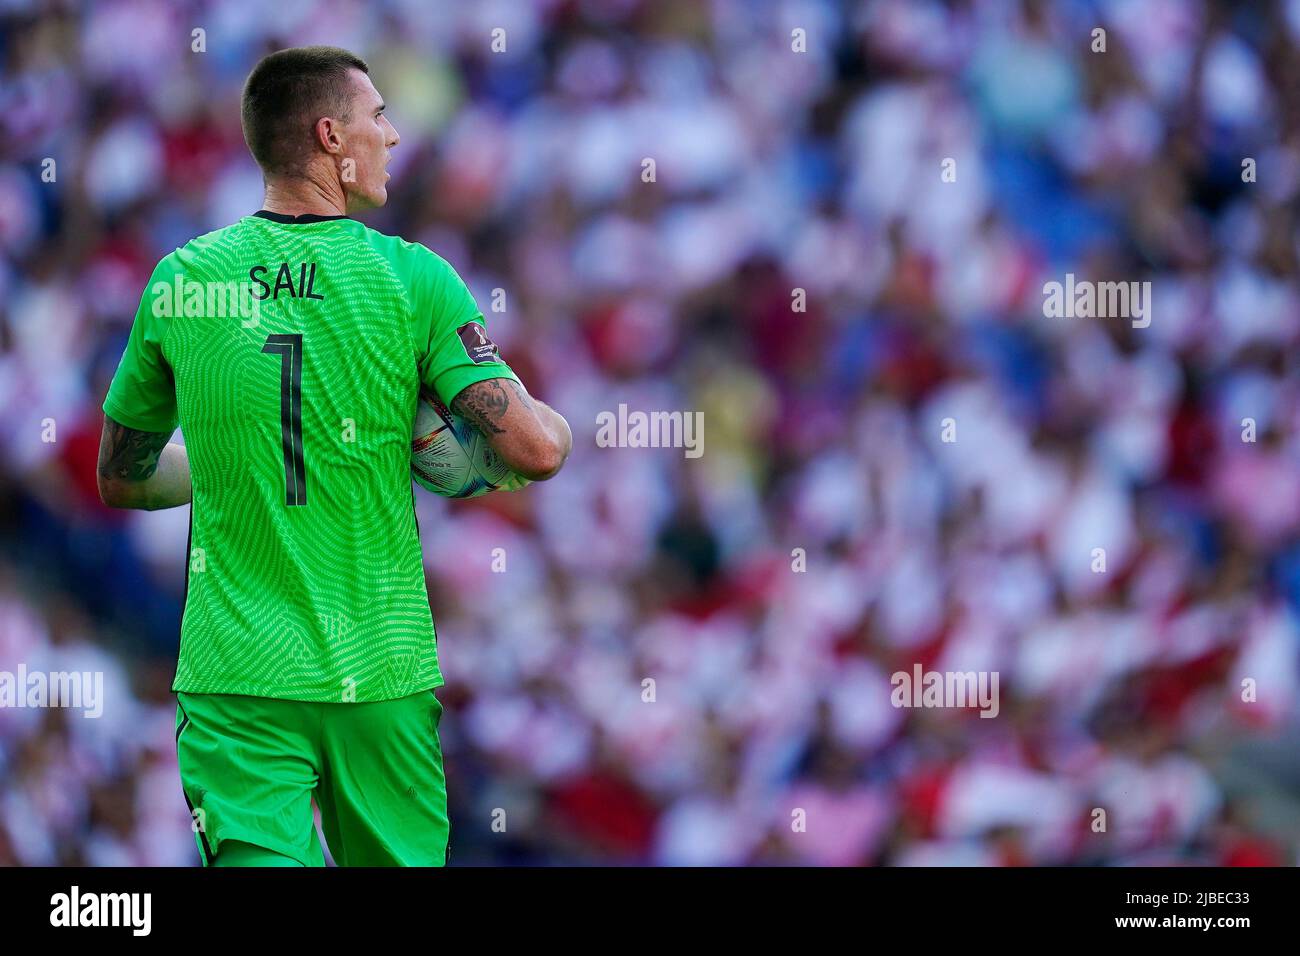 Barcelona, Spain. June 5, 2022, Oliver Sail of New Zealand during the friendly match between Peru and New Zealand played at RCDE Stadium on June 5, 2022 in Barcelona, Spain. (Photo by Bagu Blanco / PRESSINPHOTO) Stock Photo